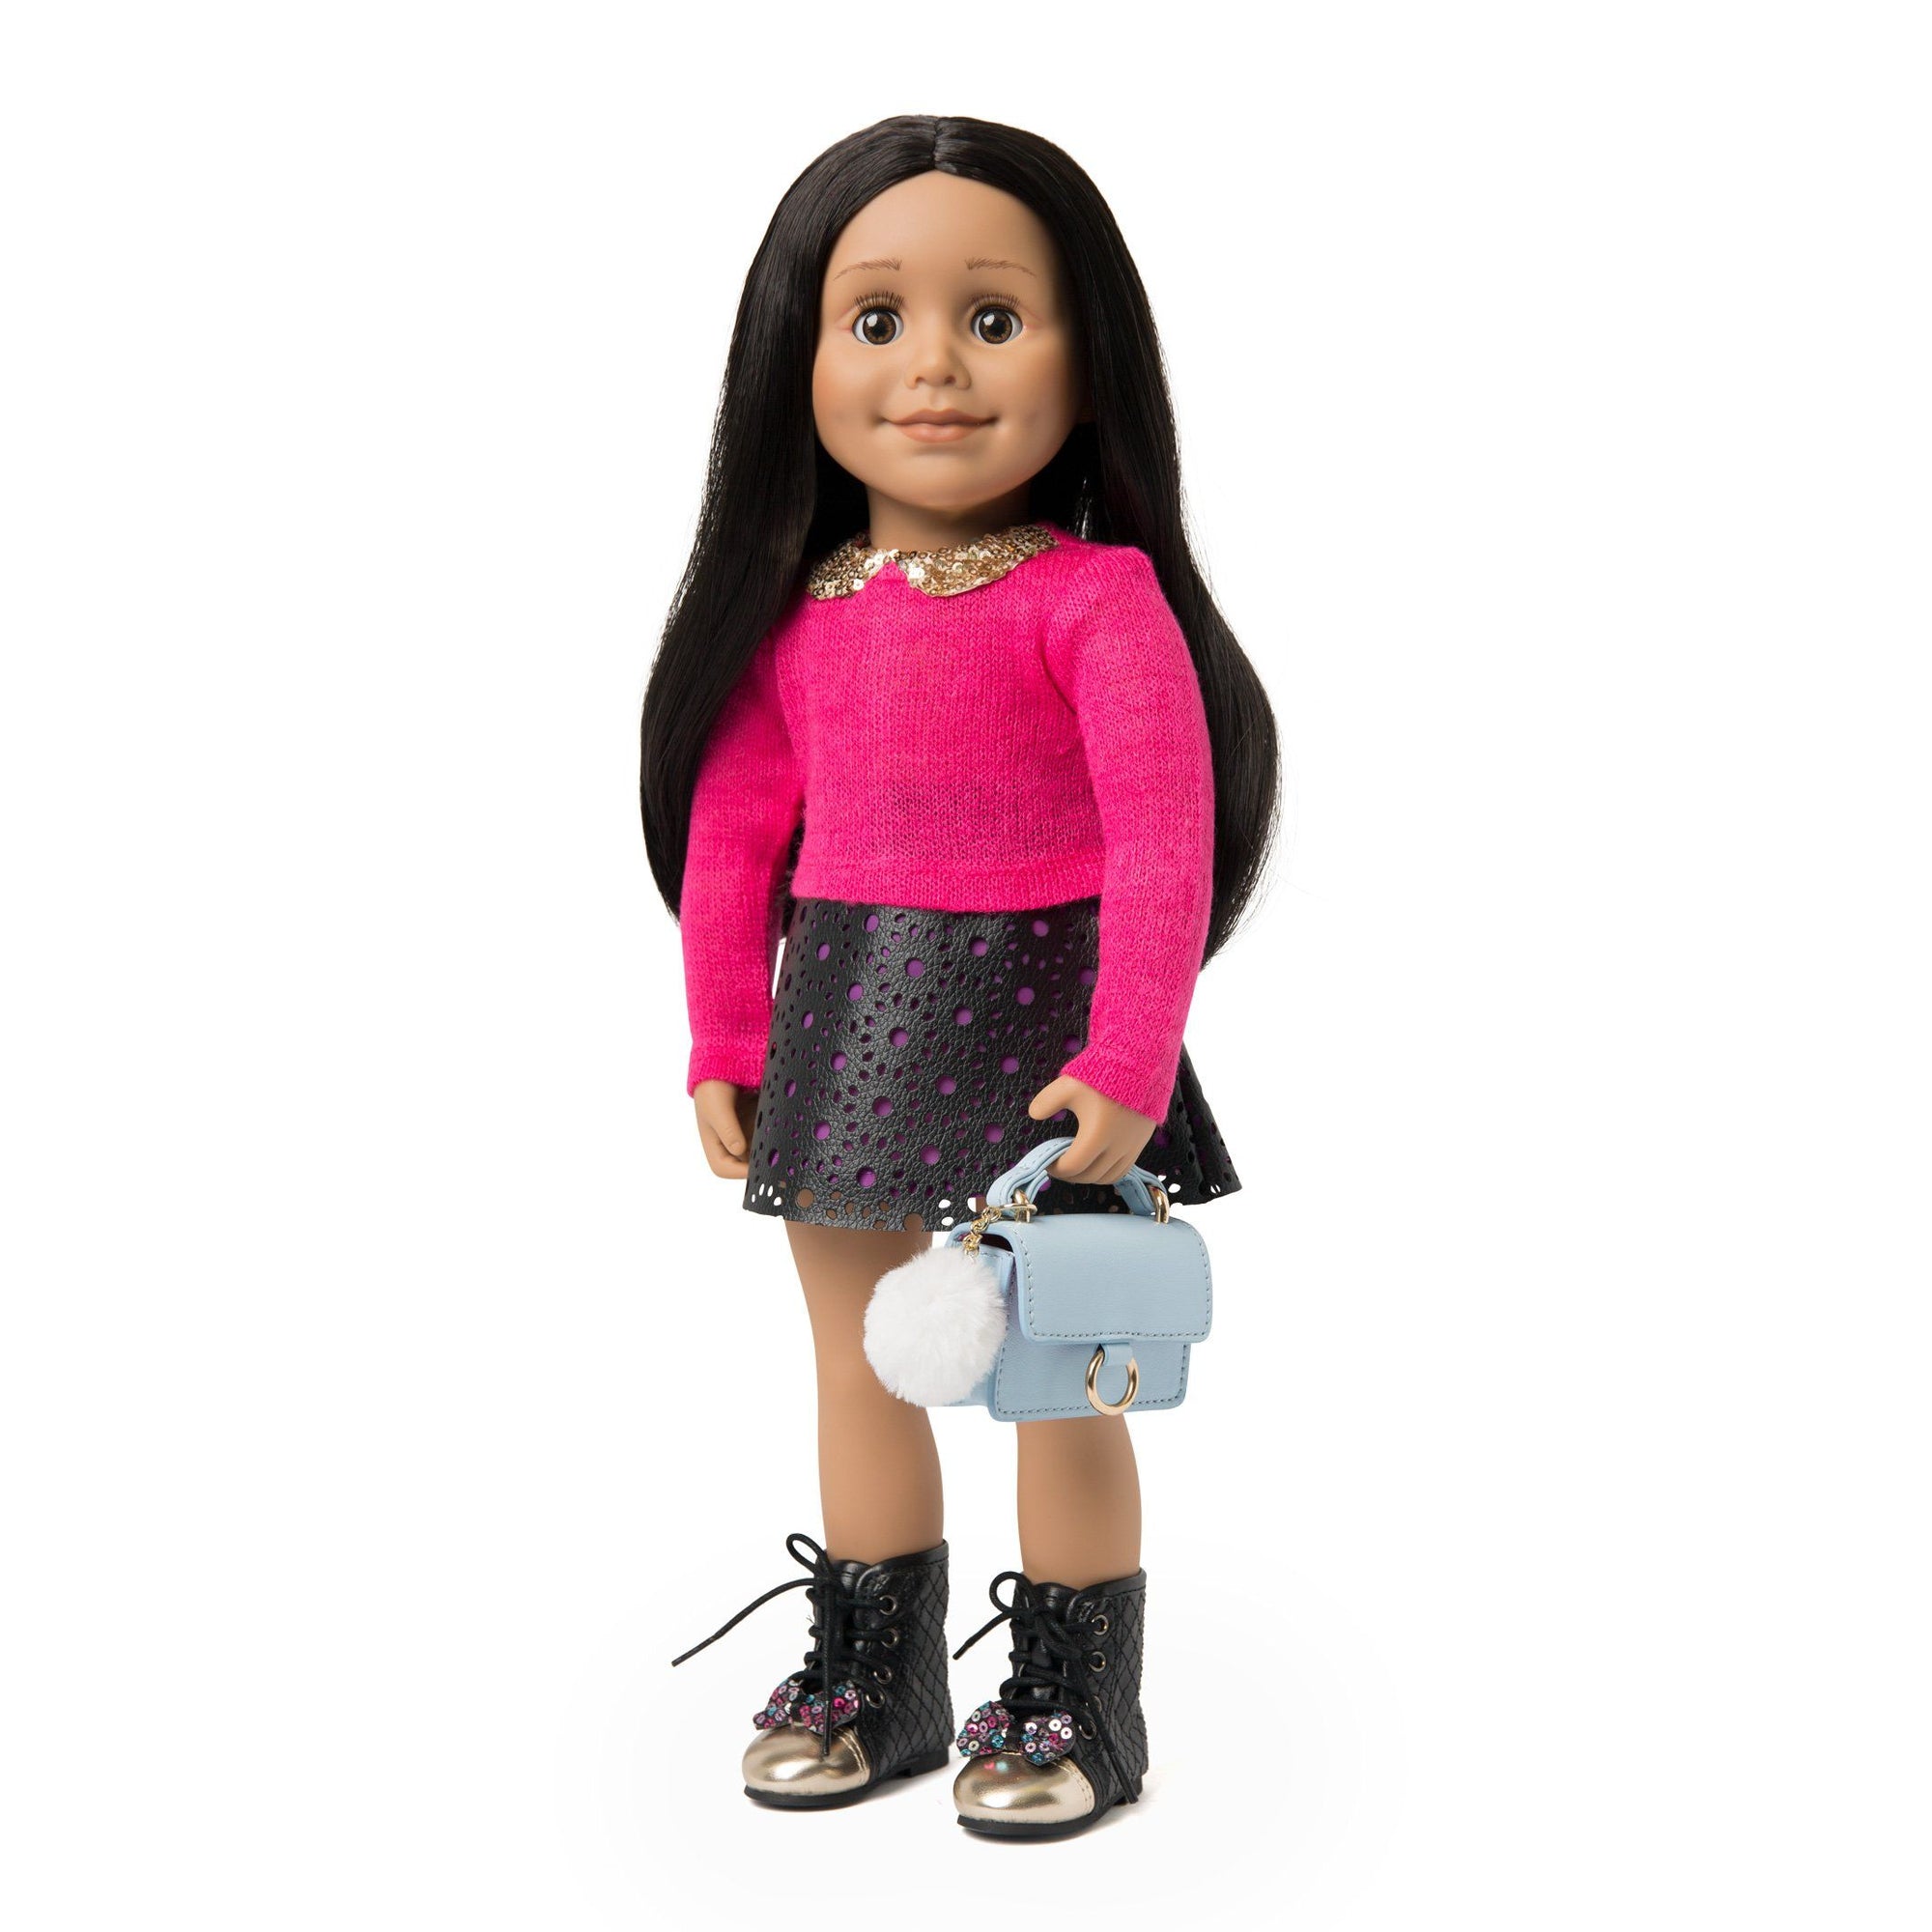 Pink sweater and leather like skirt for 18" dolls